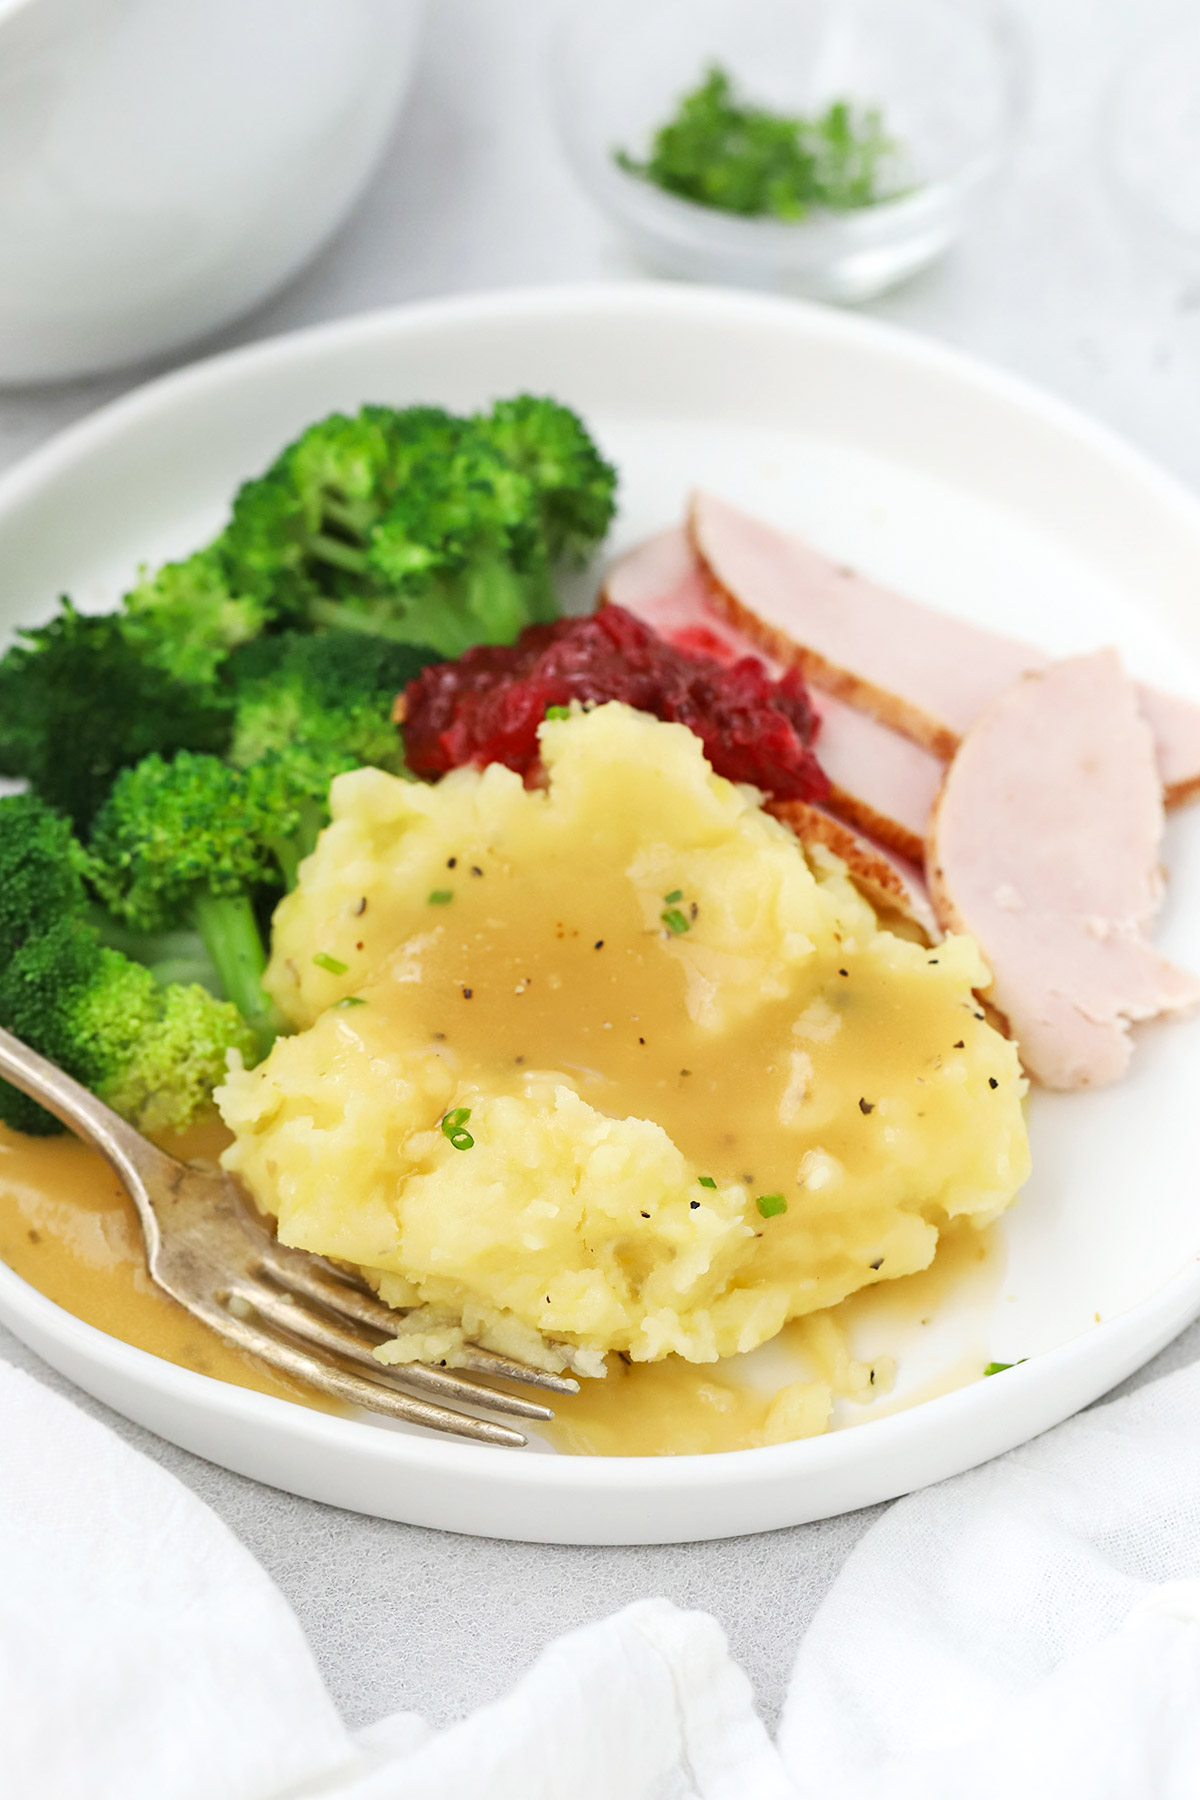 Front view of a plate of slow cooker mashed potatoes with gravy, broccoli, turkey, and cranberry sauce